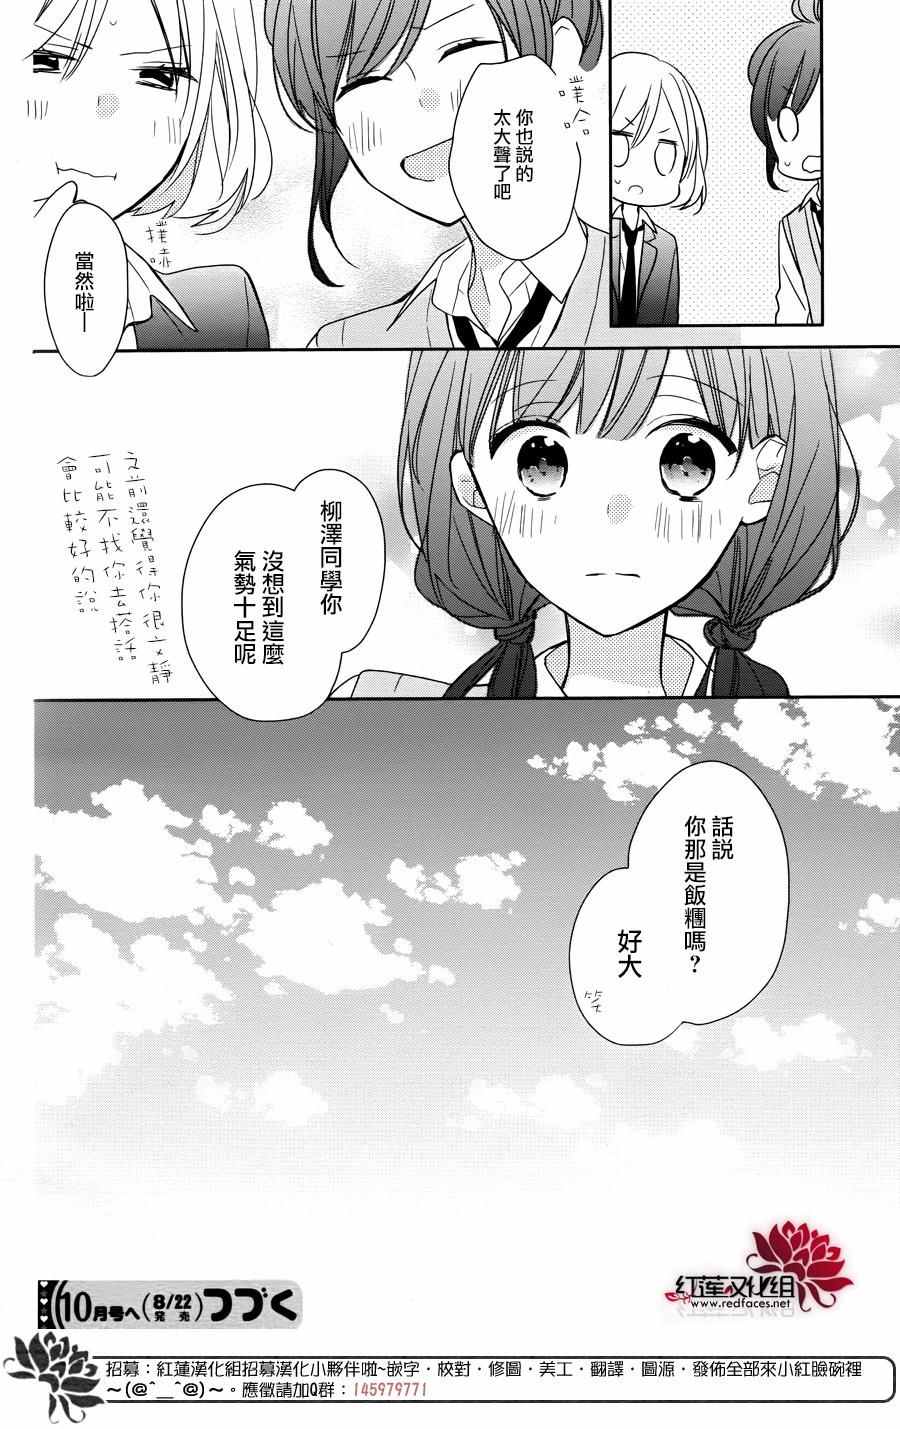 《If given a second chance》漫画 second chance 002话